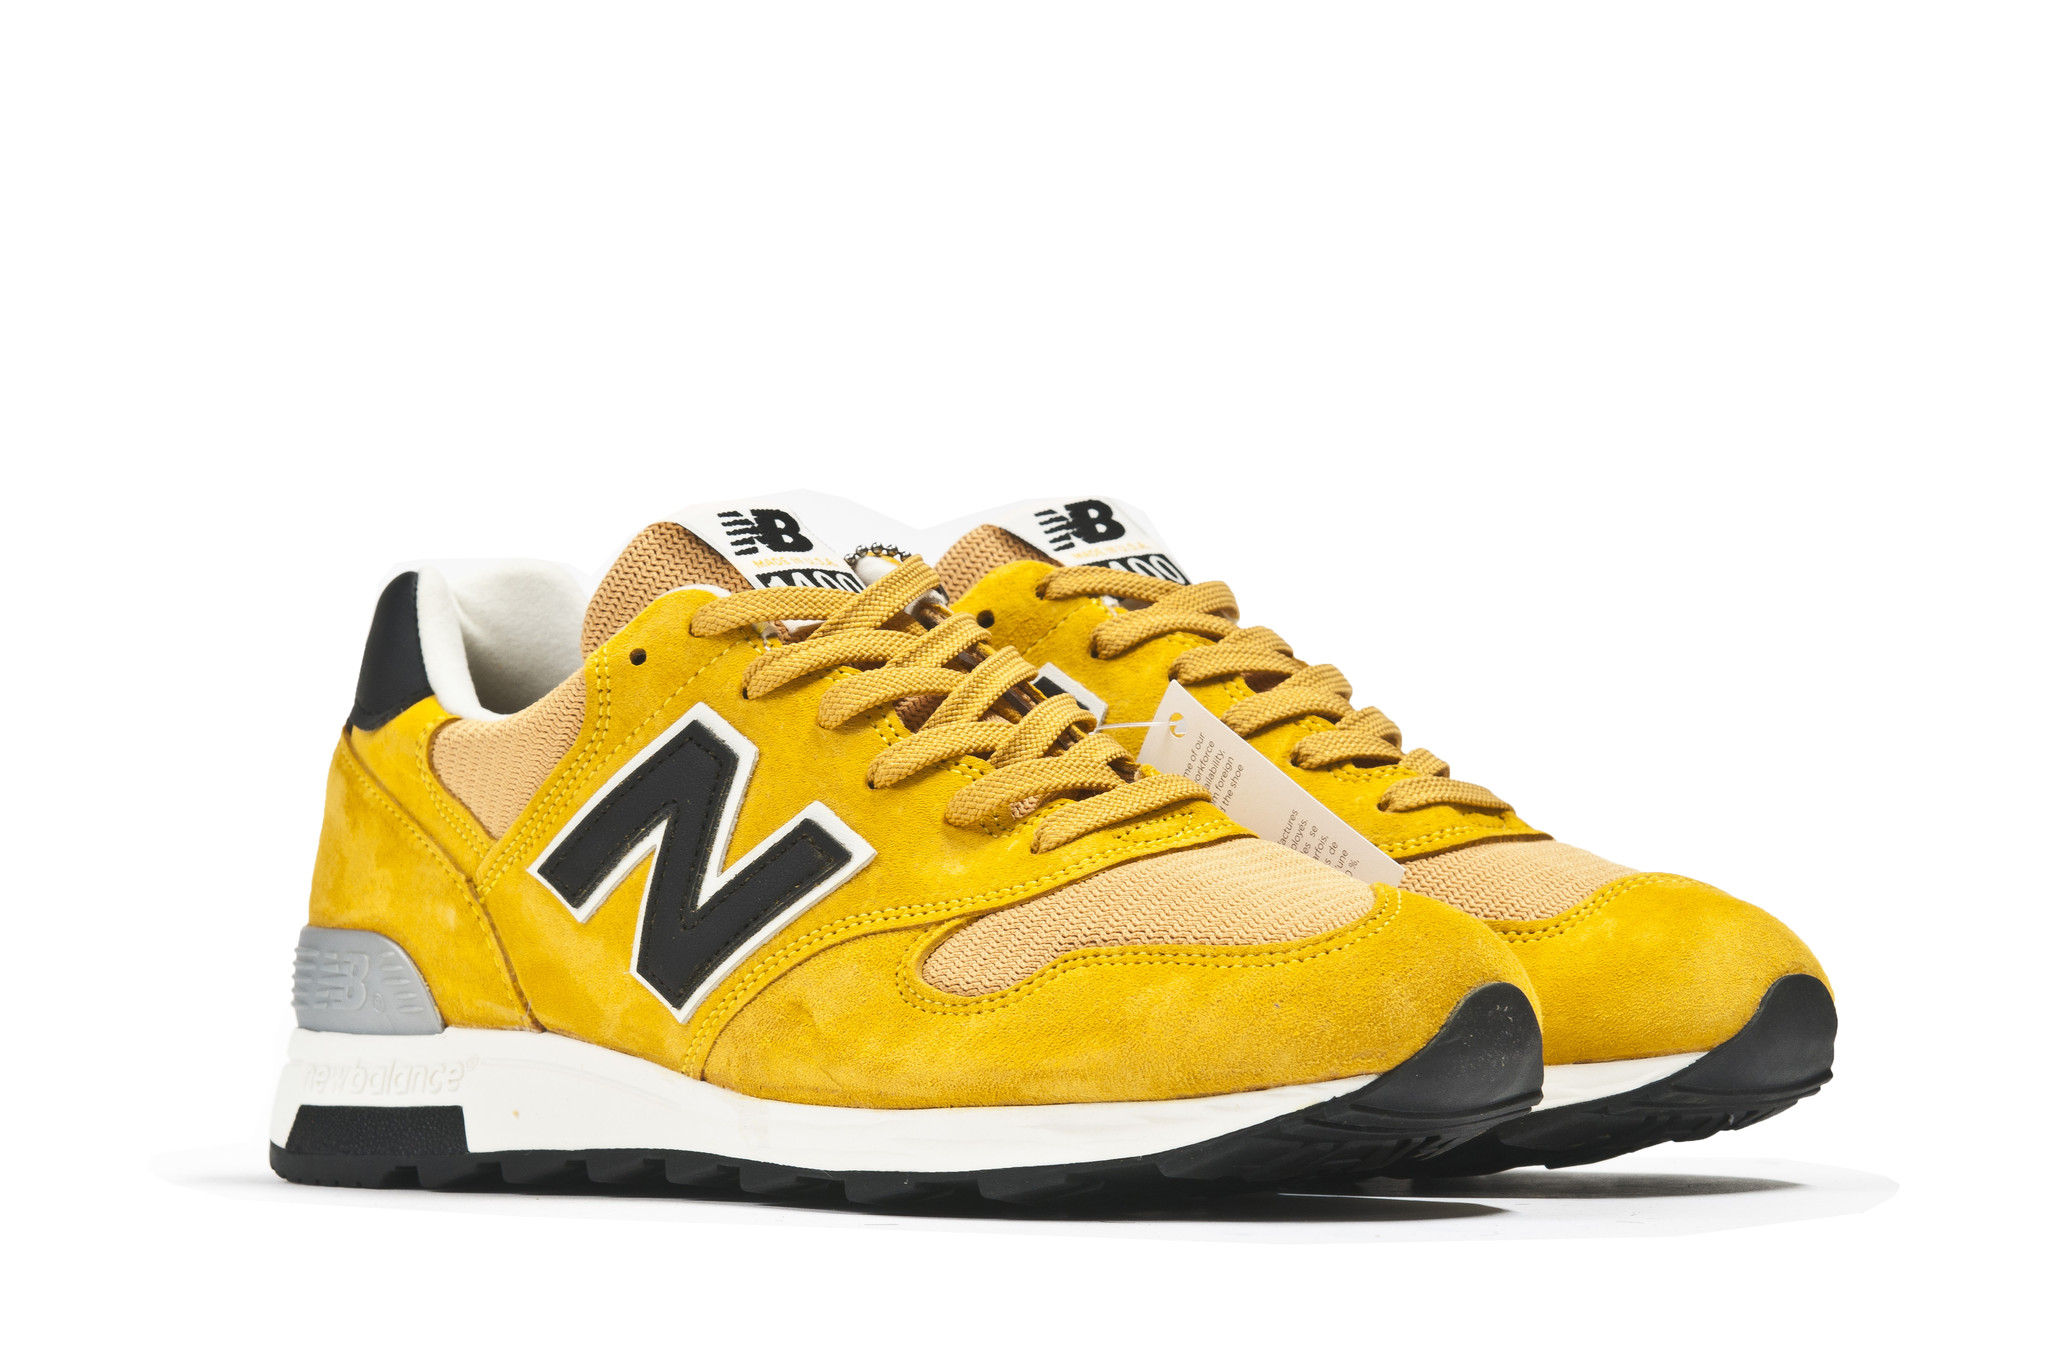 new balance homme moutarde